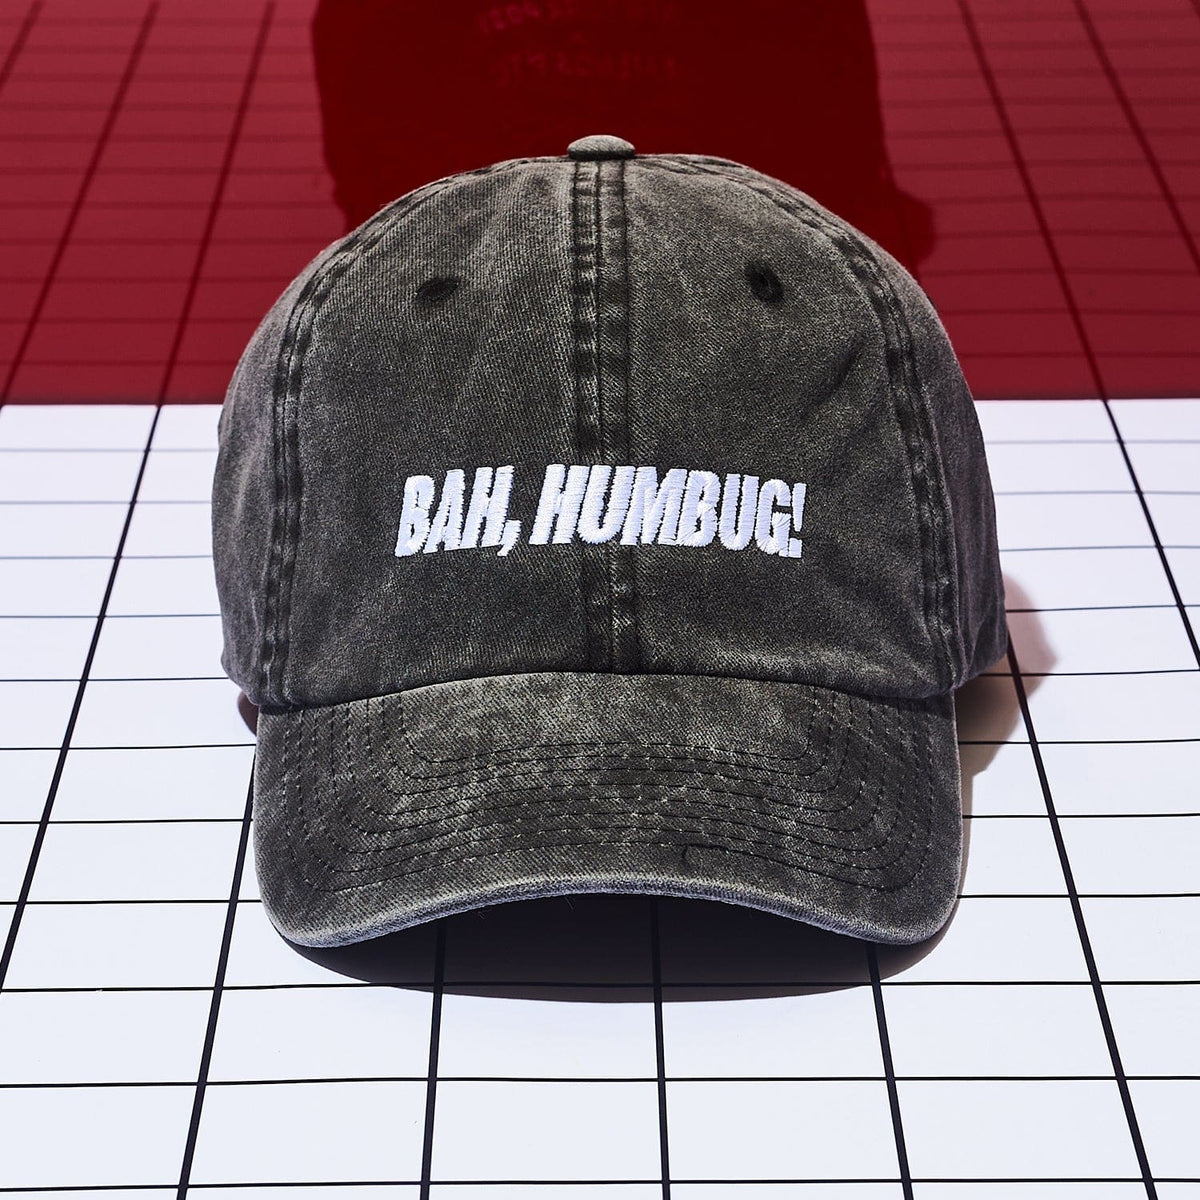 Friends Nyc x Ny Post Bah Humbug Dad Hat Exclusive - Hand